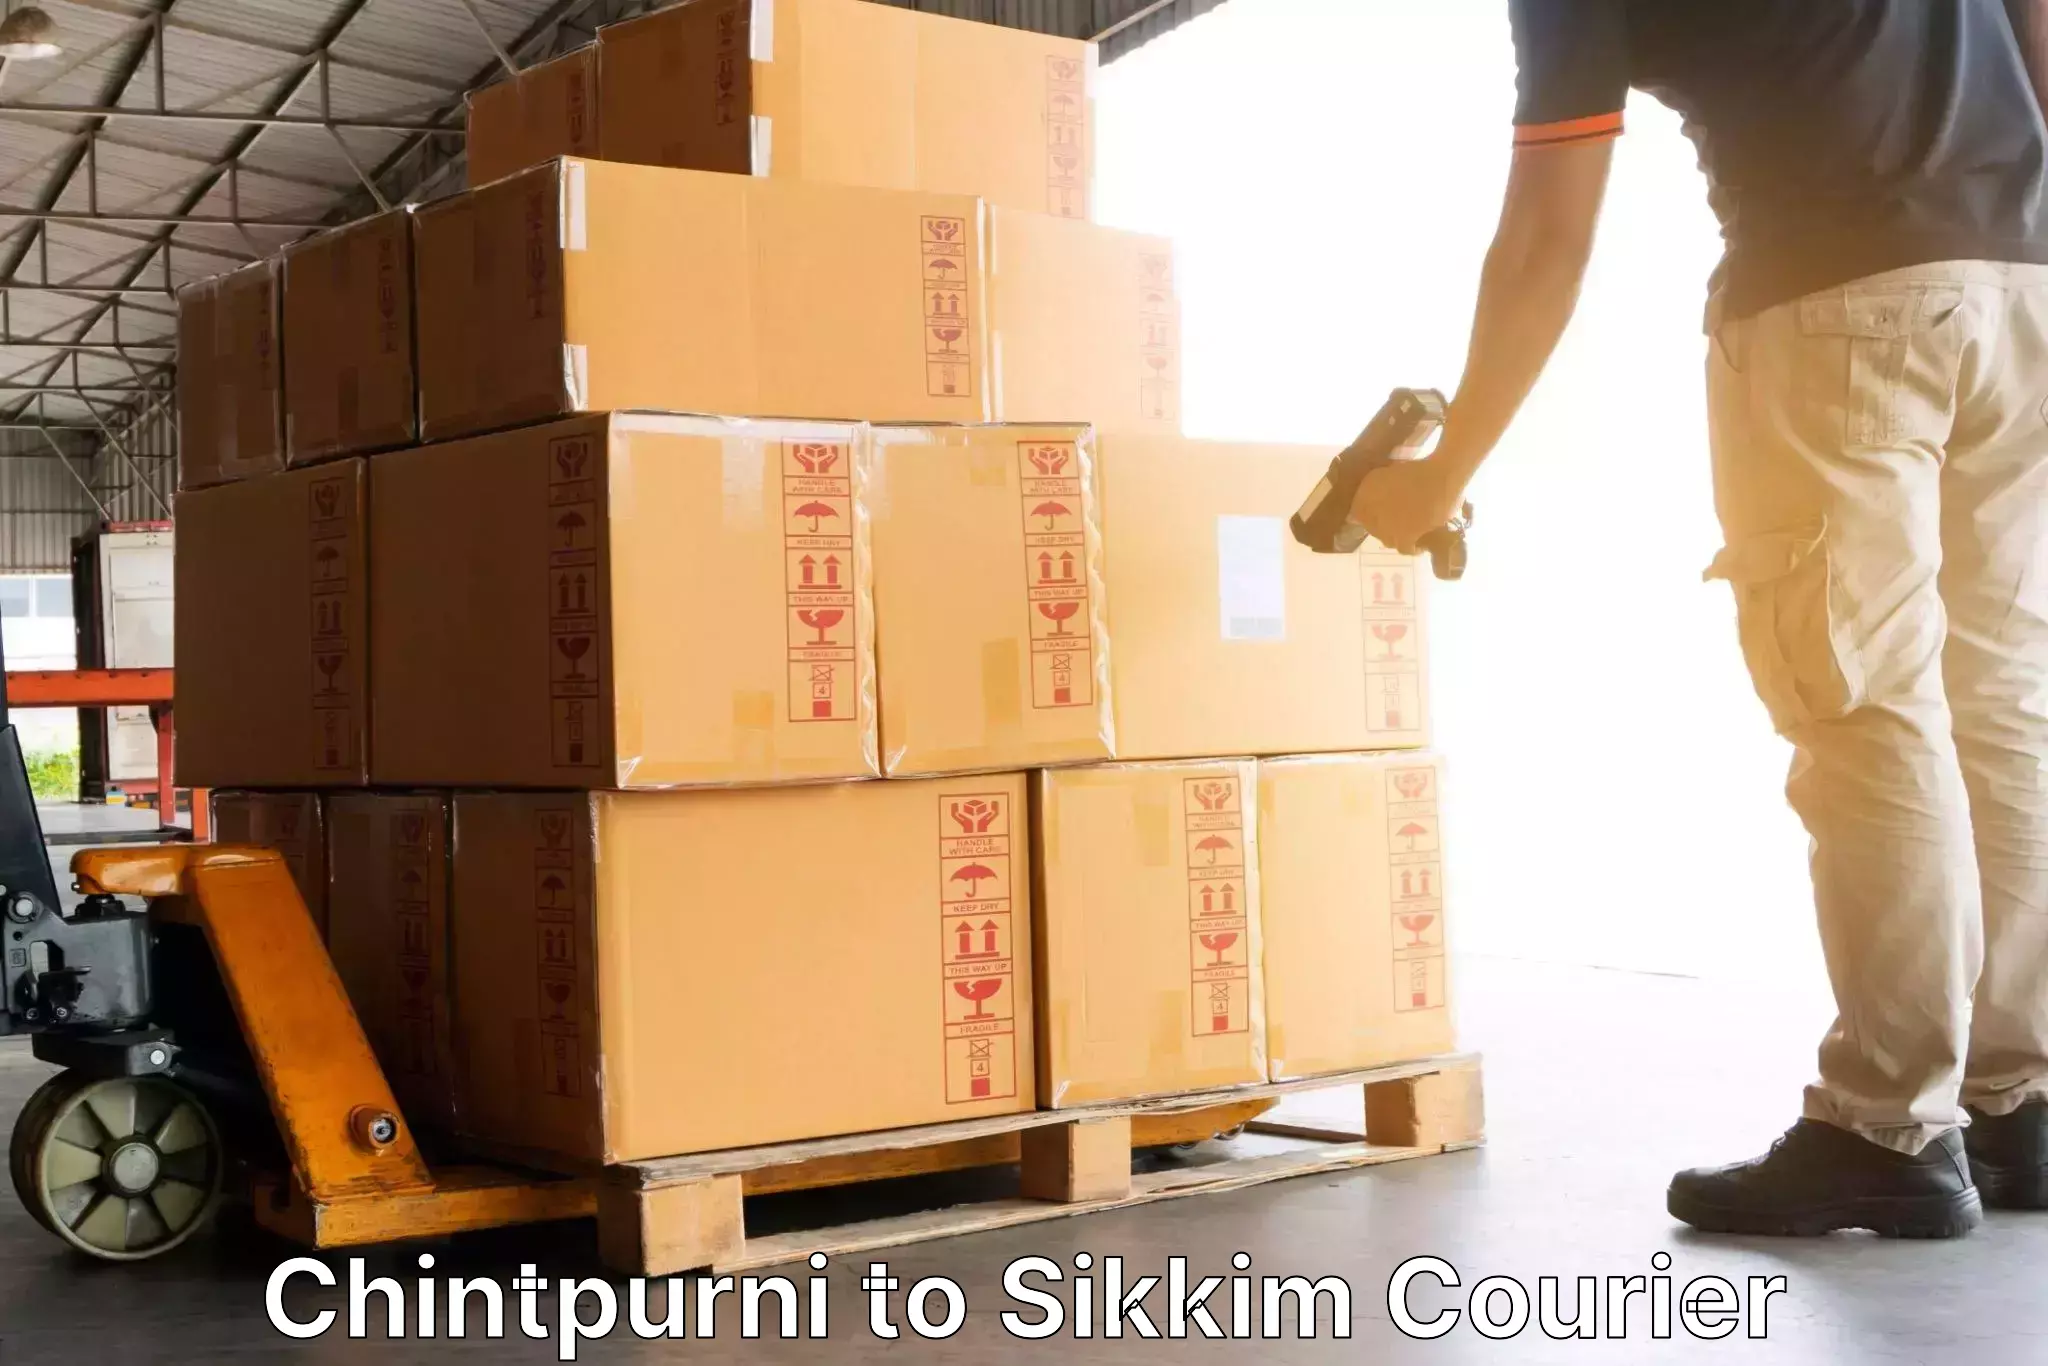 Weekend courier service Chintpurni to Pelling